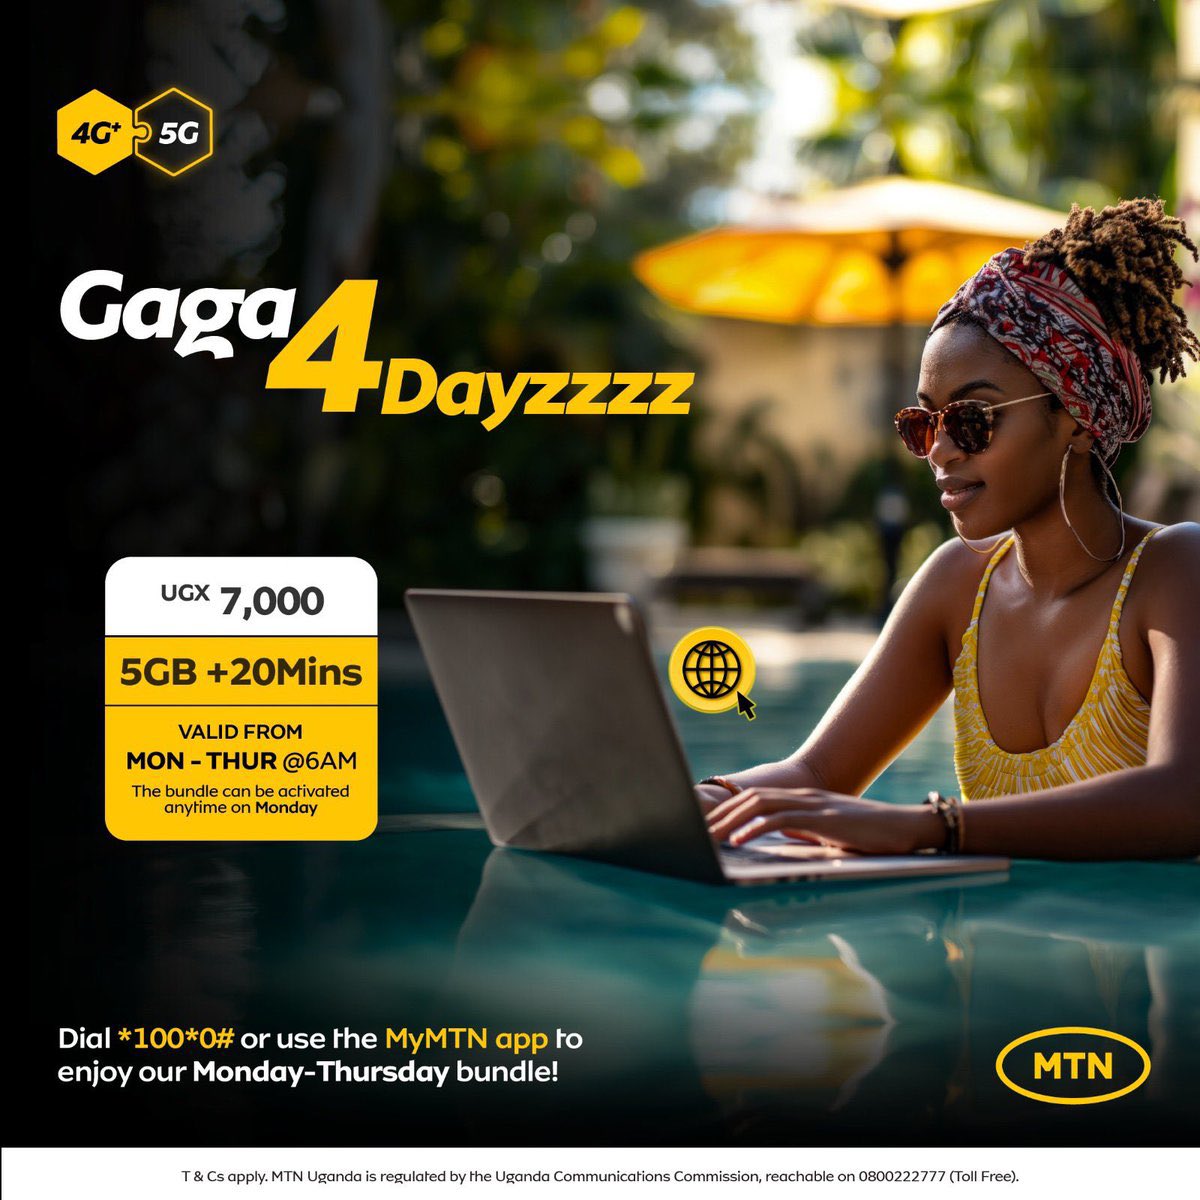 Before midnight, make sure you cease the opportunity to secure 5Gbs of data and 20 mins — #Gaga4Dayzzzz bundle via today up to Thursday.

Dial *100*0# or use #MyMTN App to activate.
#TogetherWeAreUnstoppable